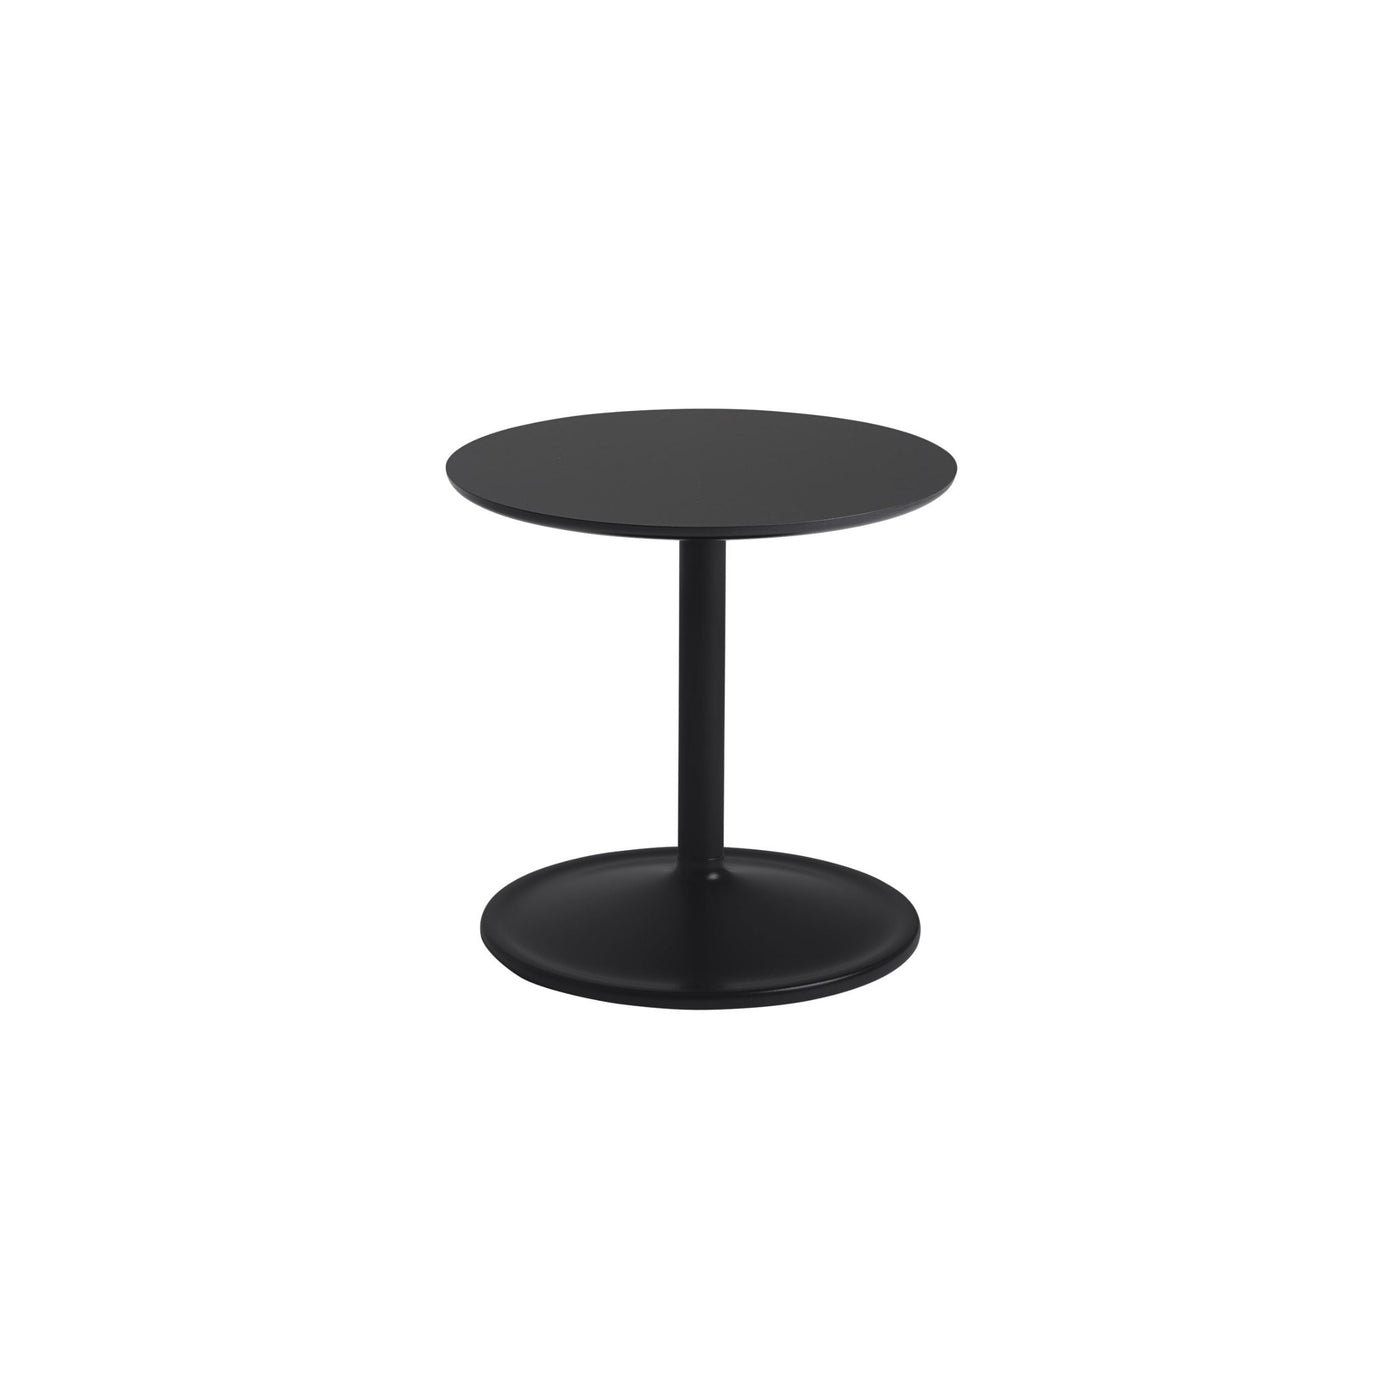 Muuto Soft side table Ø41 x 40cm high. Shop online at someday designs. #colour_black